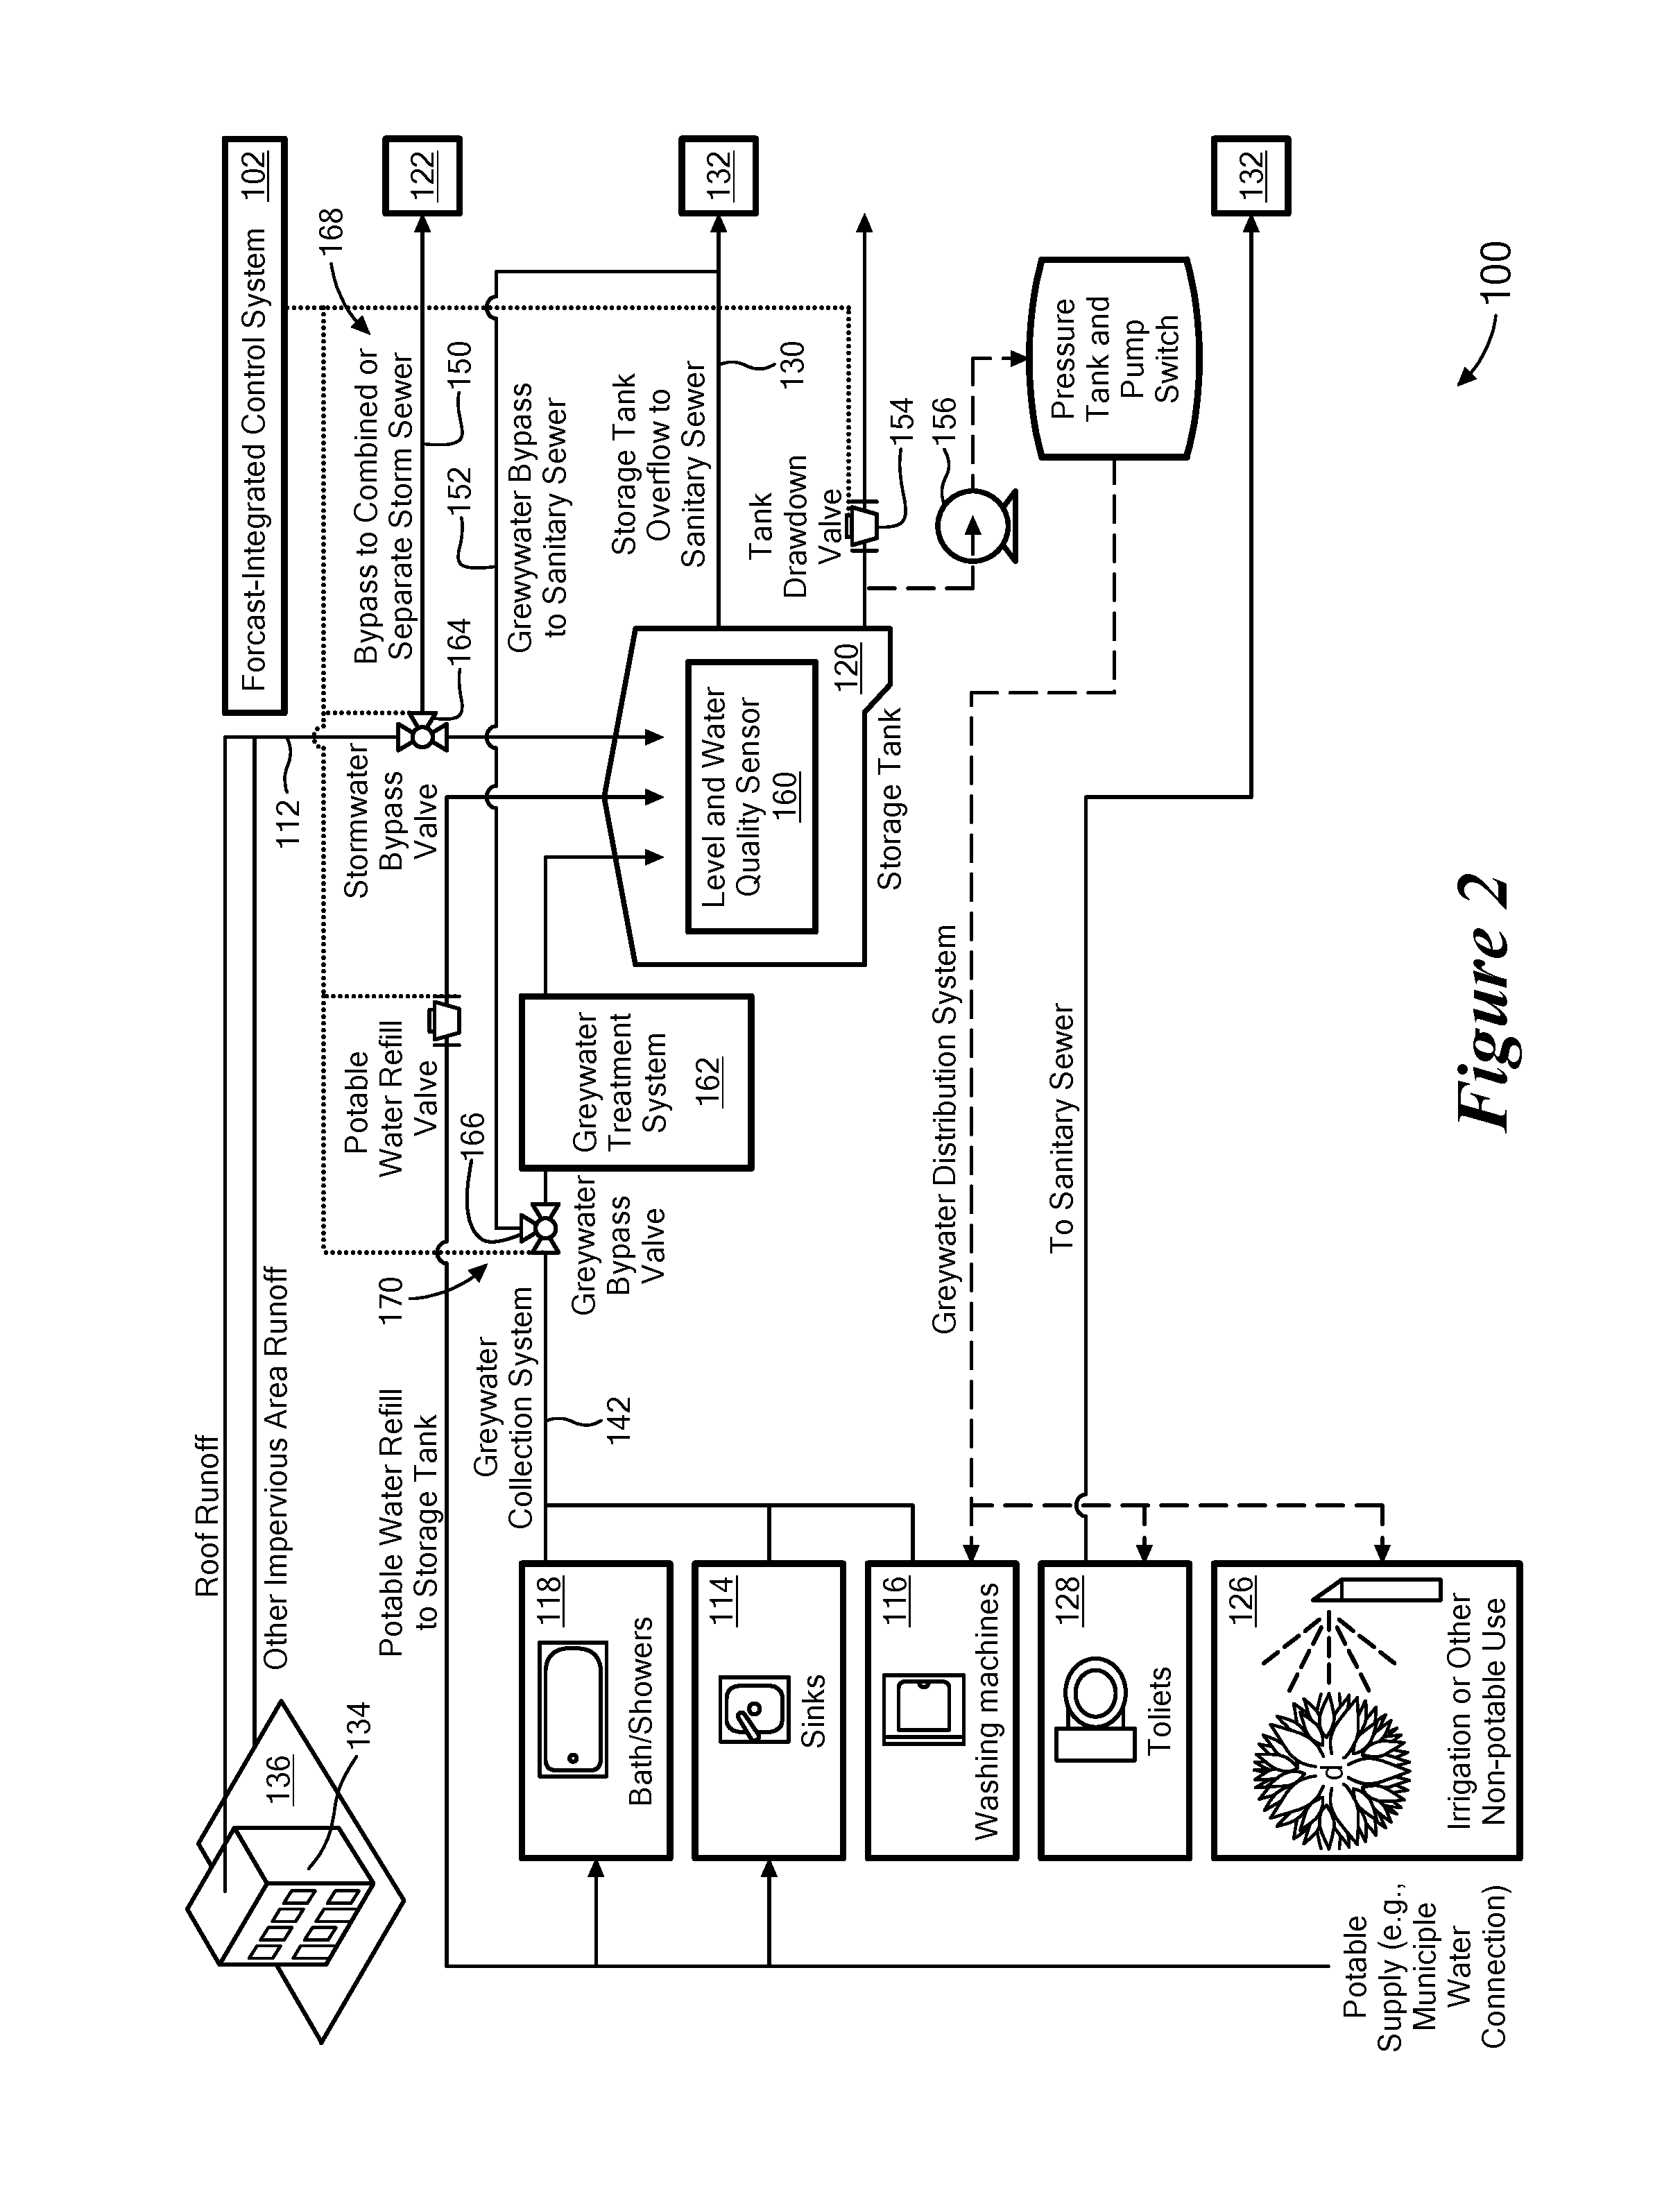 Method for automated control of a combined greywater/stormwater system with forecast integration